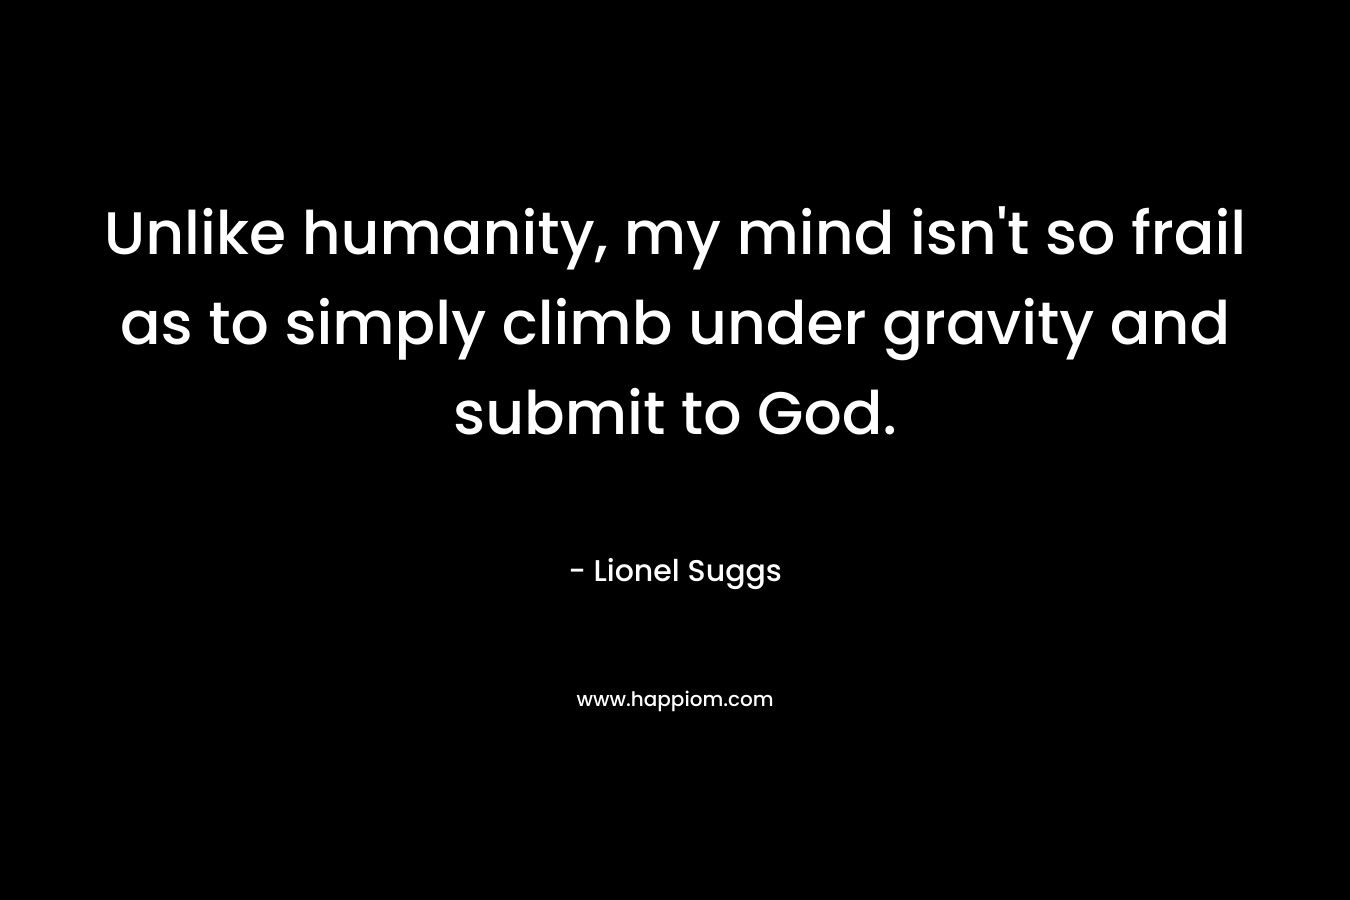 Unlike humanity, my mind isn't so frail as to simply climb under gravity and submit to God.